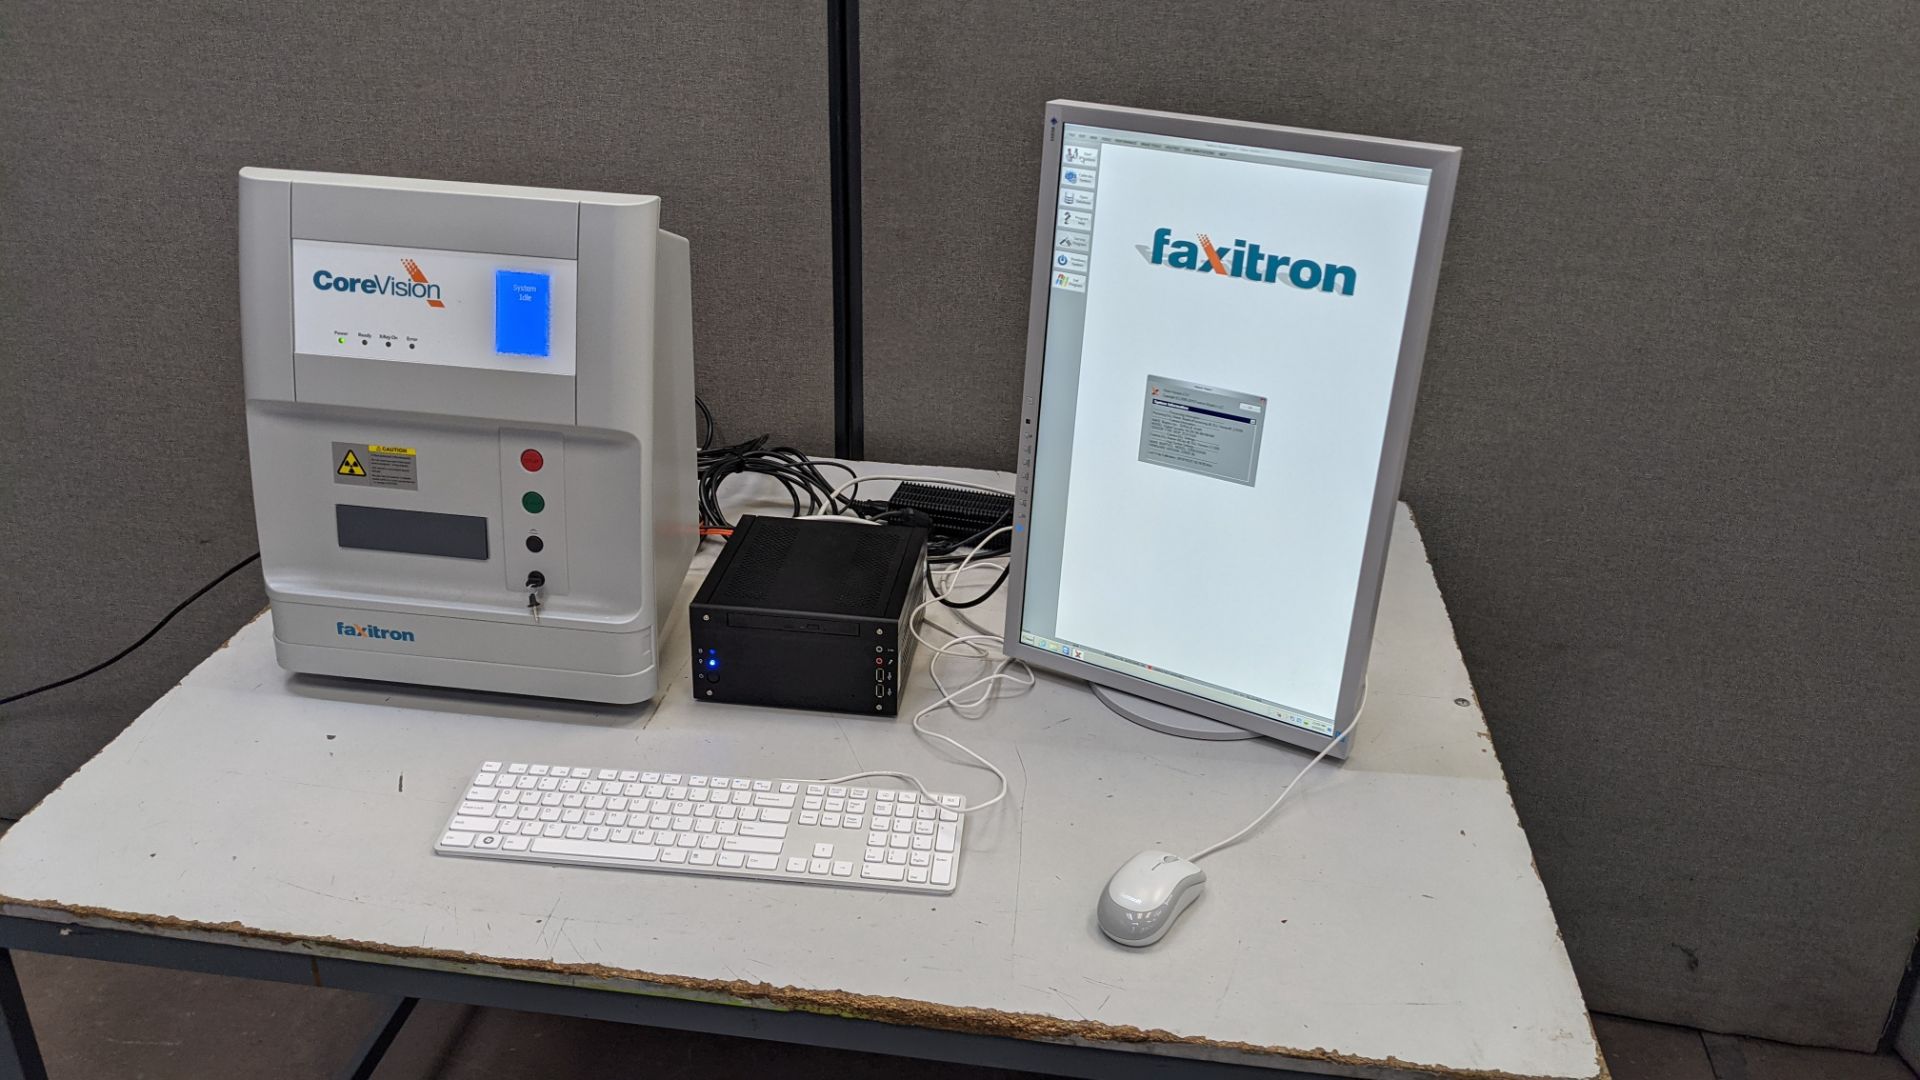 Faxitron CoreVision digital specimen system, purchased new in 2015. - Image 23 of 24